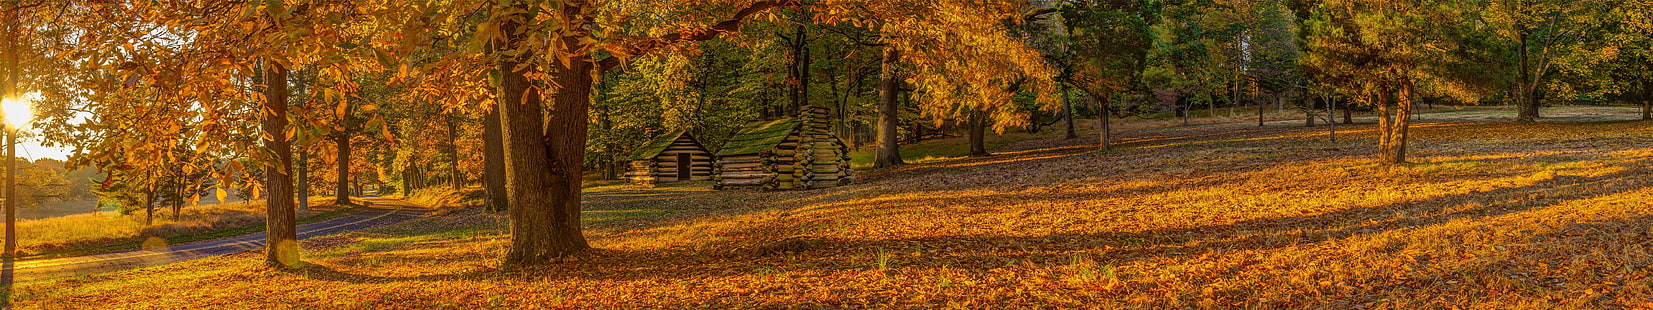 brown leafed tree, seasons, fall, grass, trees, yellow, hut, Sun, nature, panorama, park, landscape, Pennsylvania, Valley Forge, HD wallpaper HD wallpaper